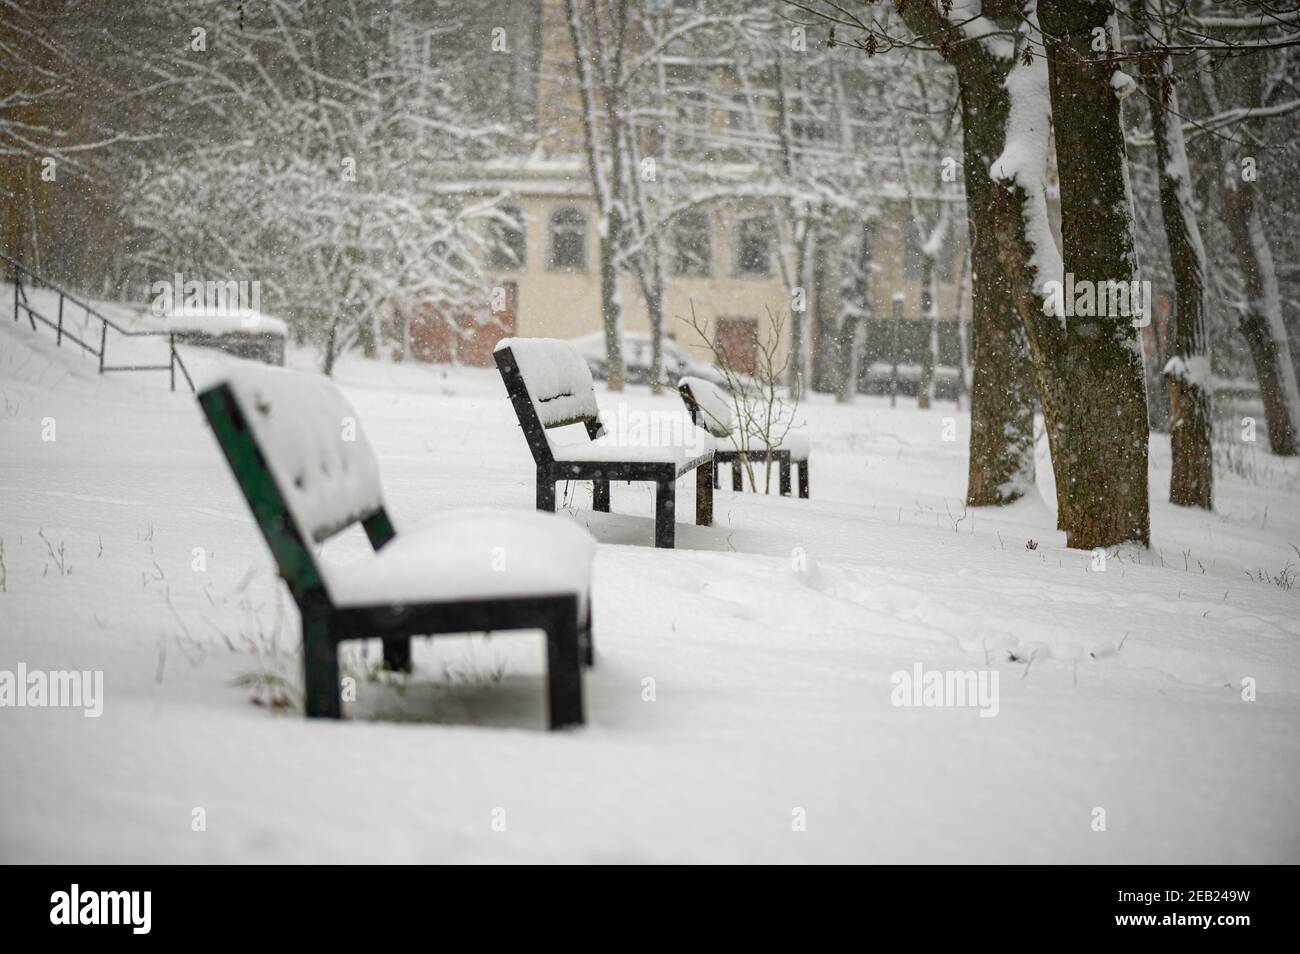 Snow covered benches in residential area park Stock Photo